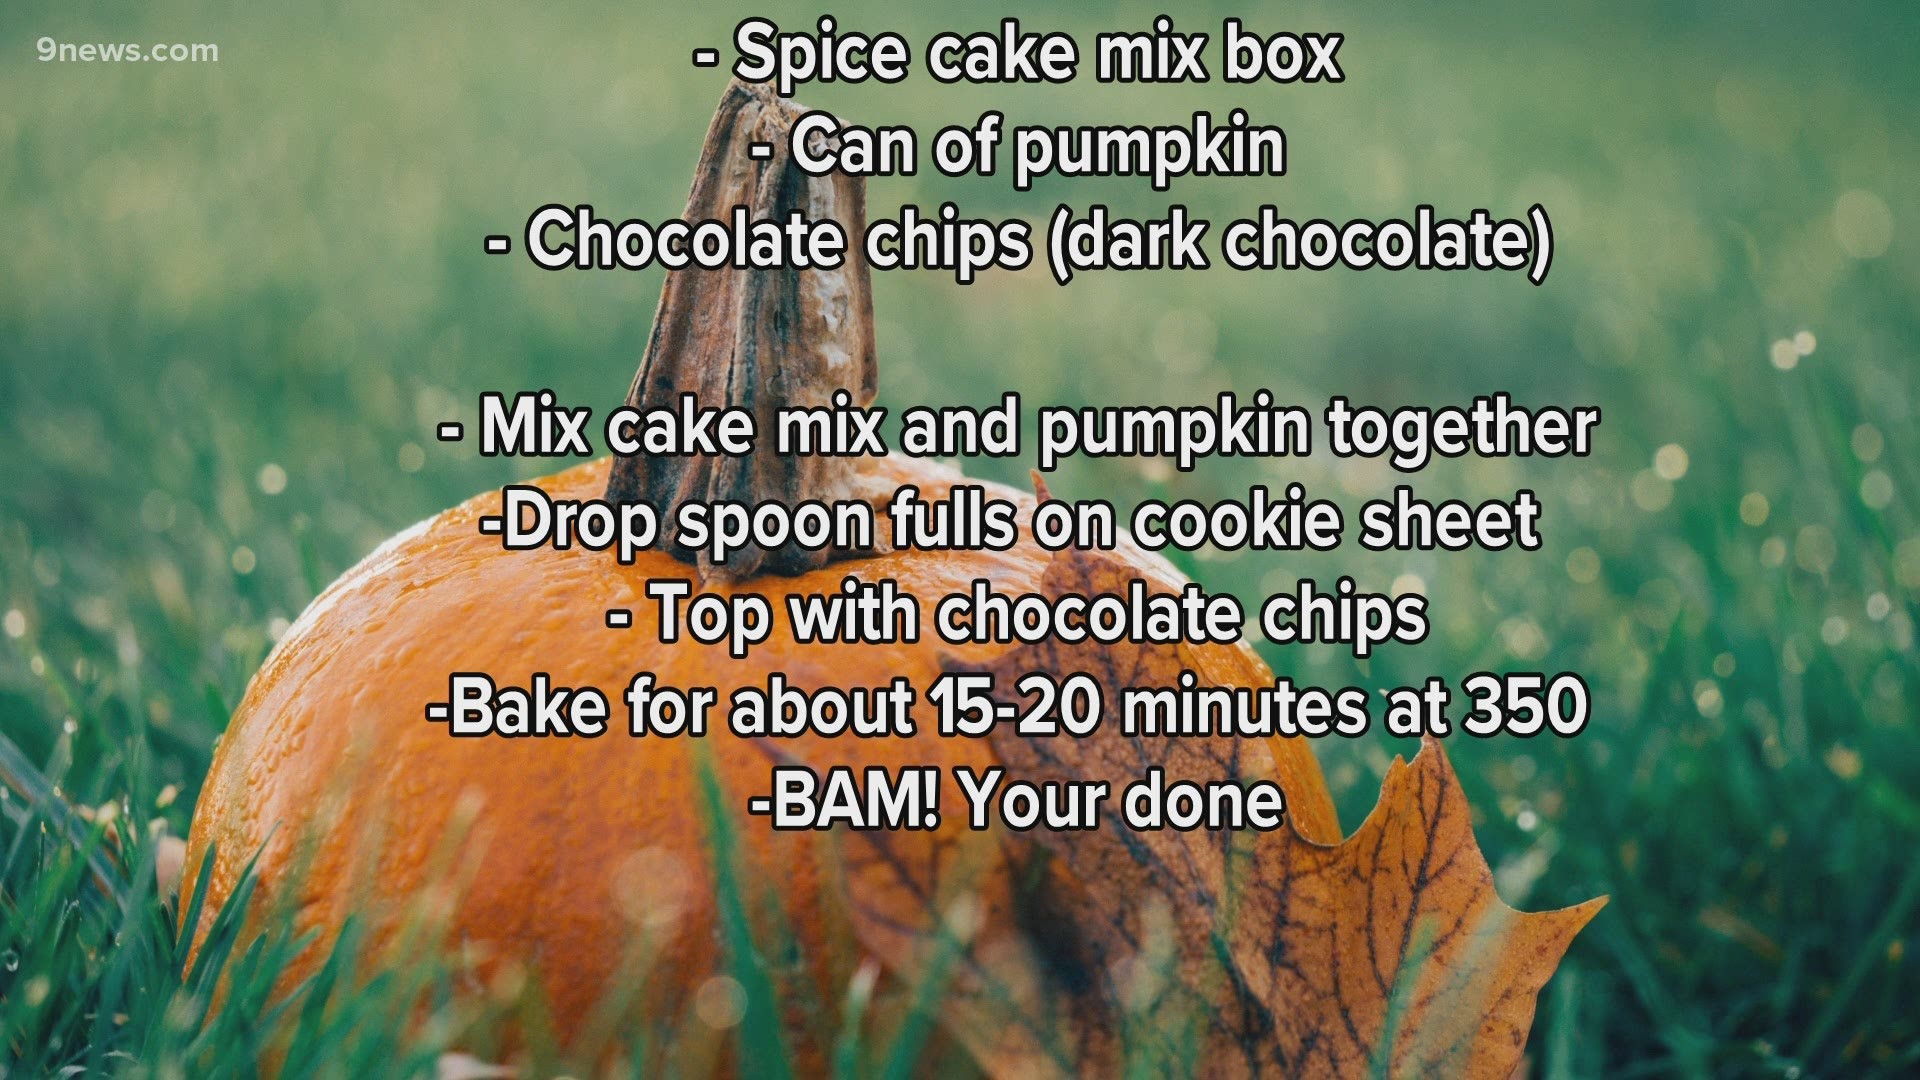 This week's recipe from 9NEWS viewer Gregory satisfies the sweet tooth and the seasonal love for pumpkin.